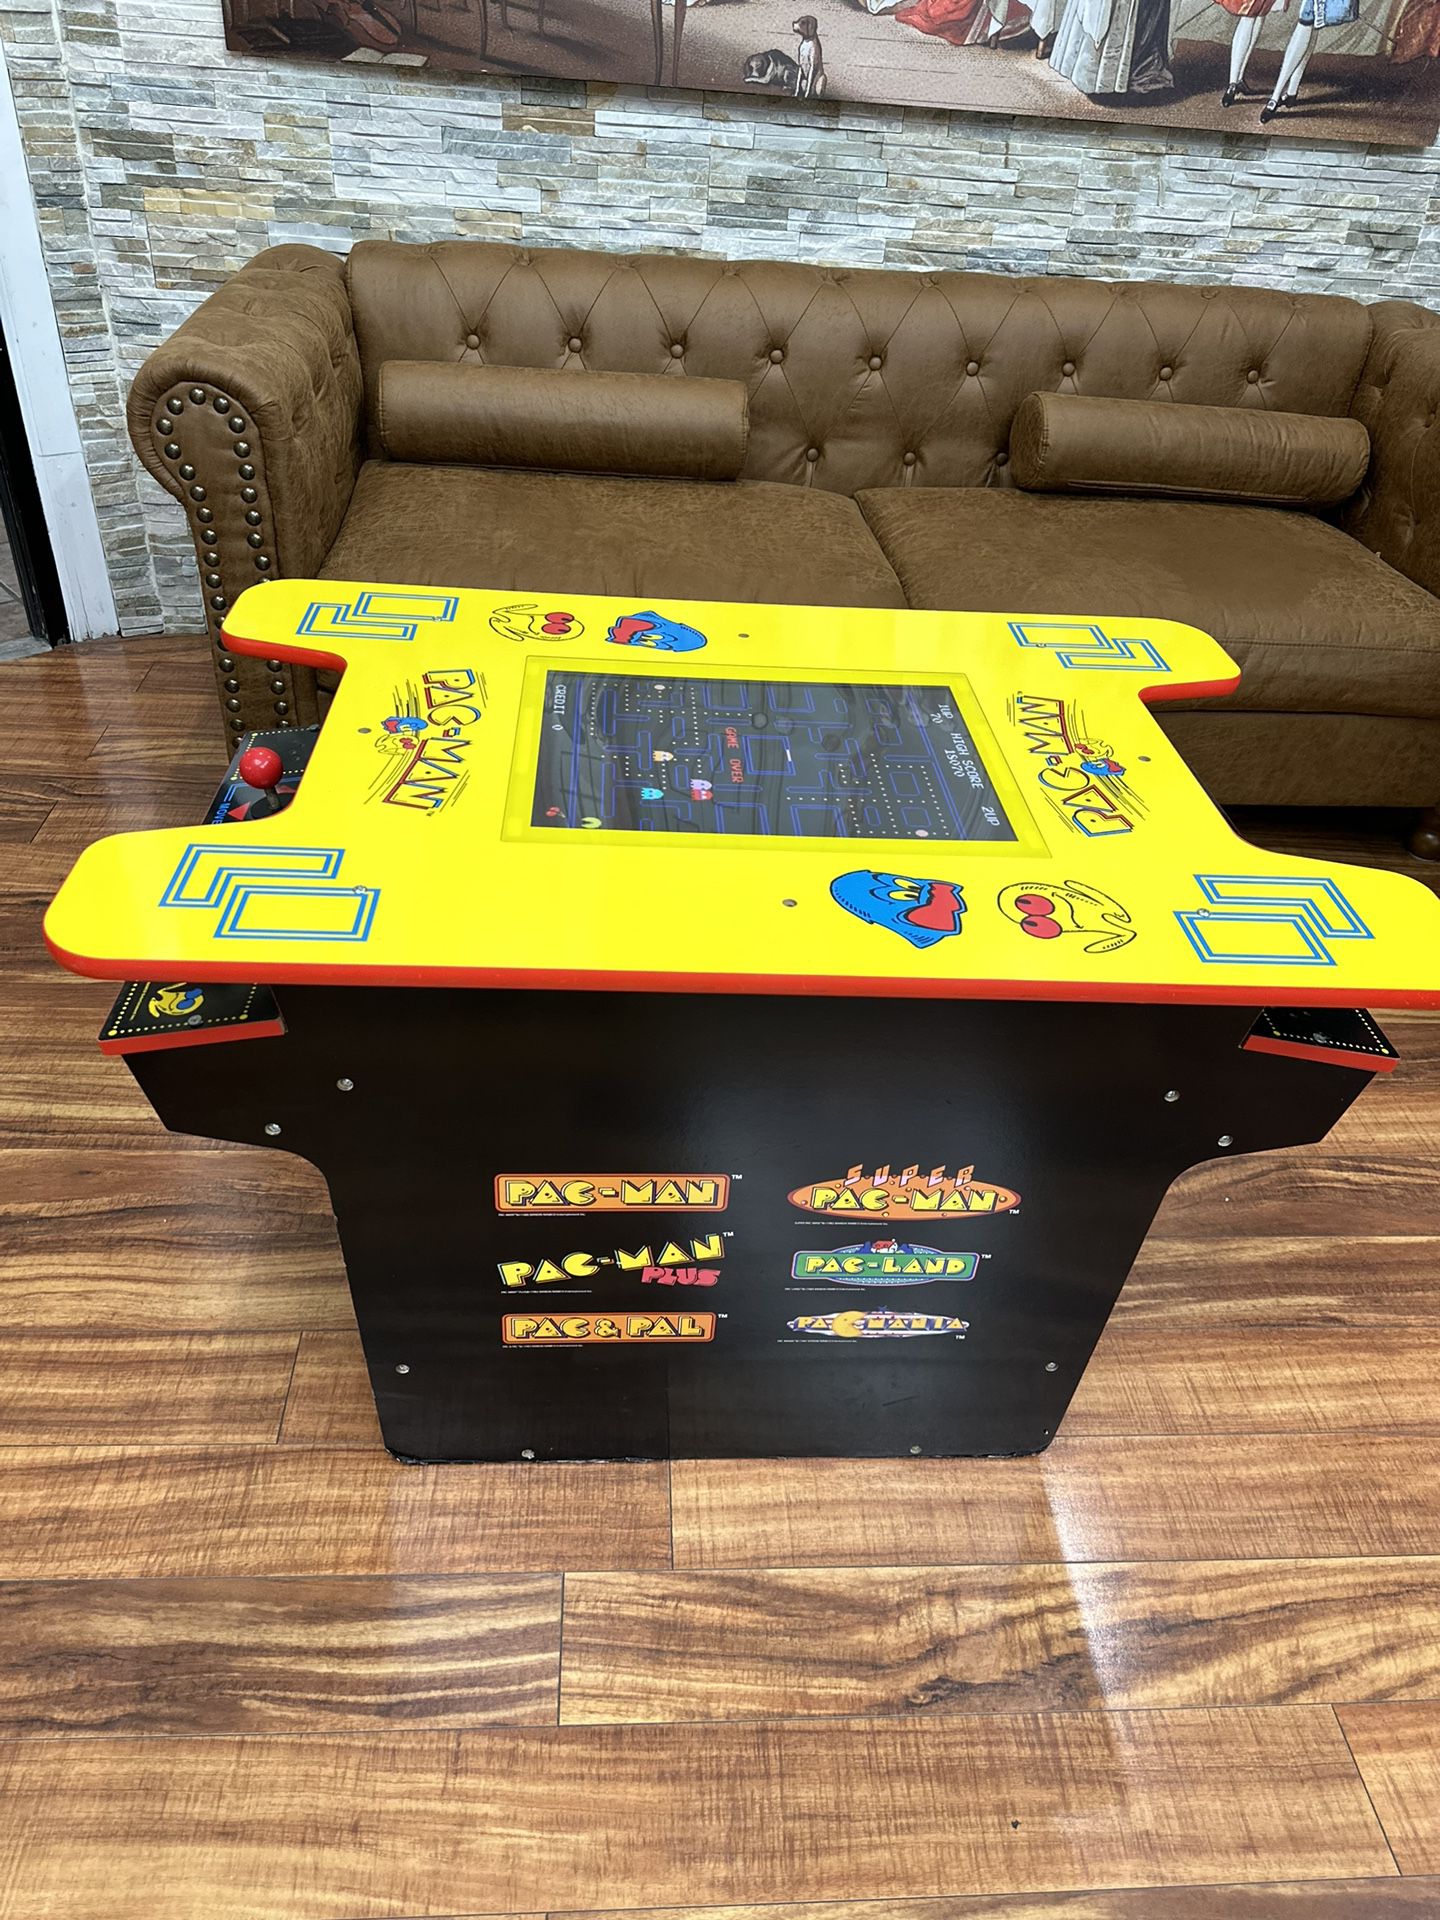 2 player pacman table arcade - 6 games  